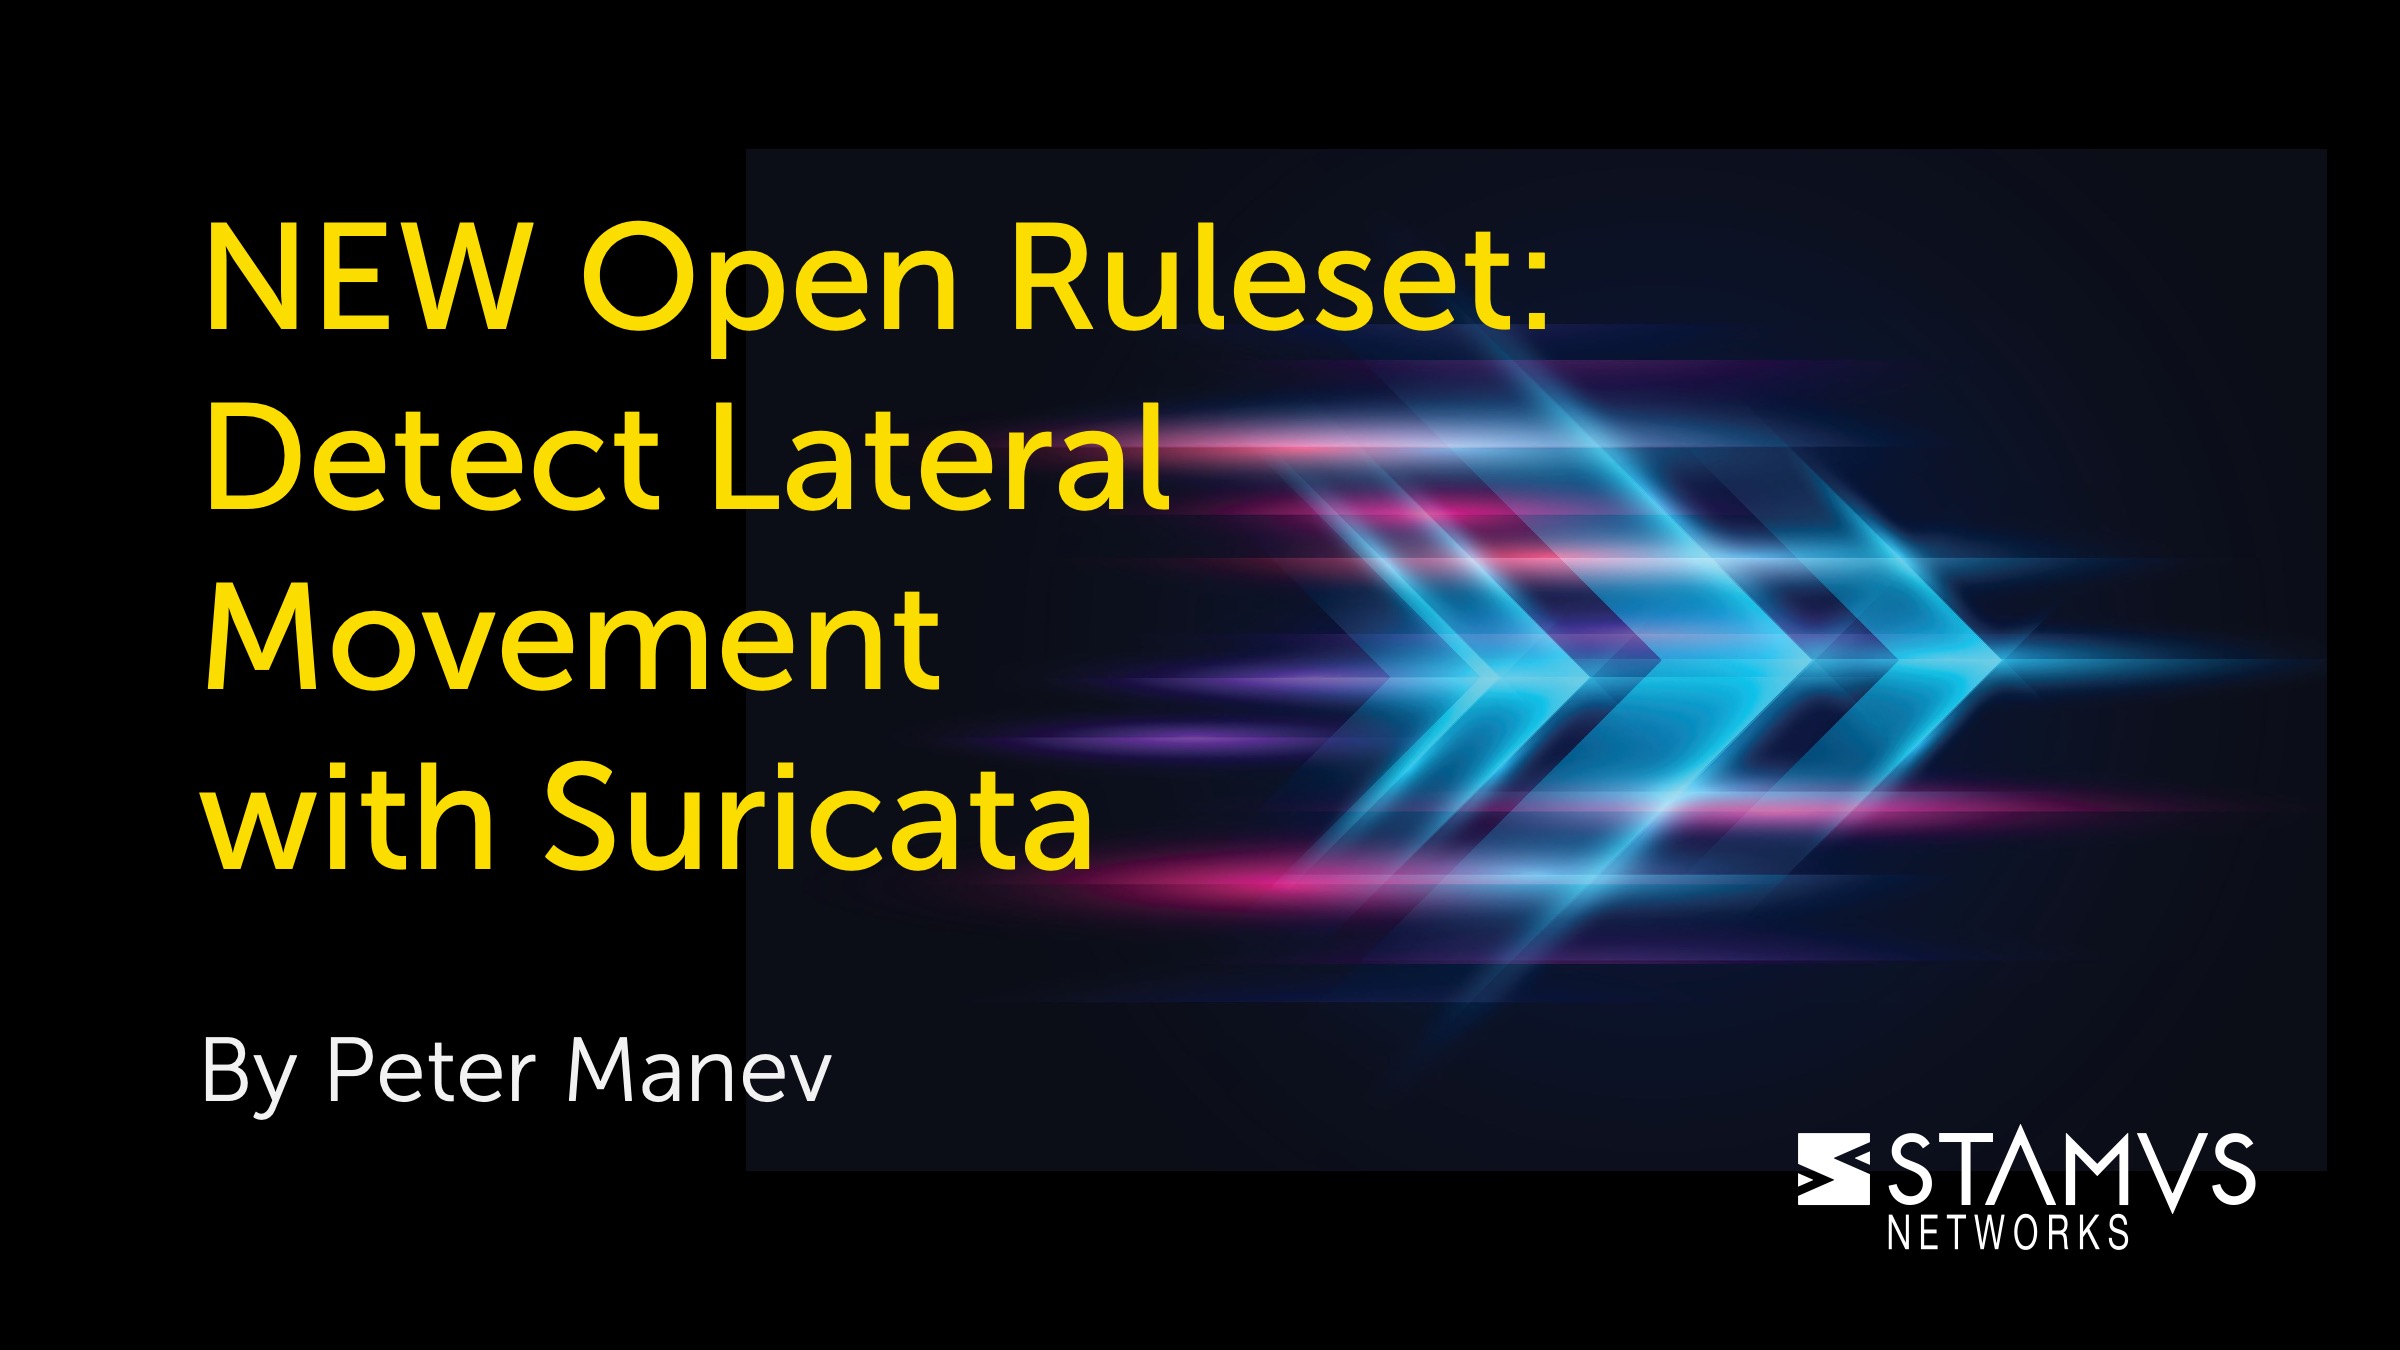 NEW! Open Ruleset for Detecting Lateral Movement with Suricata